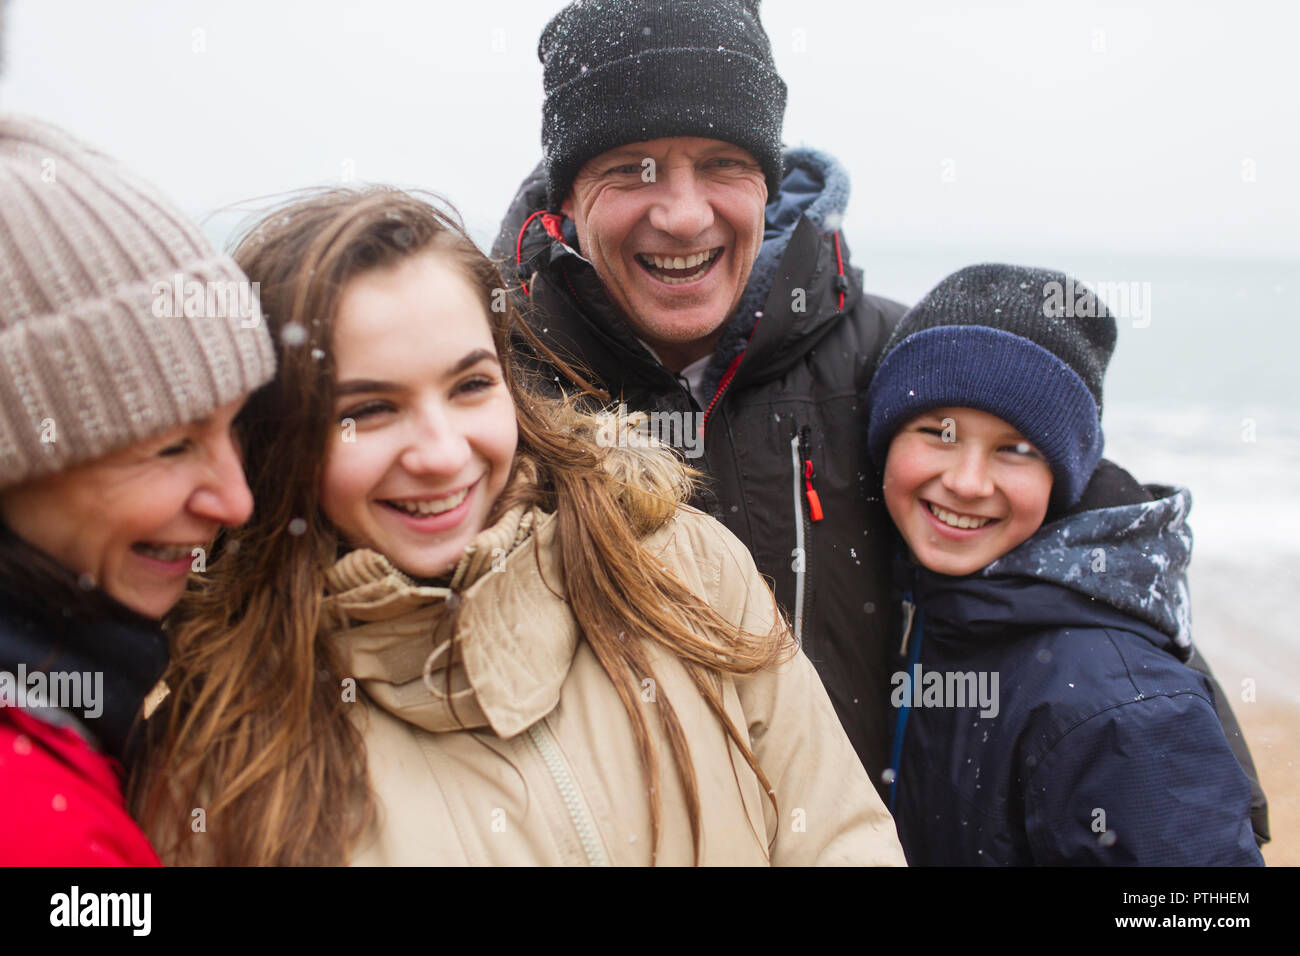 Snow falling over happy family in warm clothing Stock Photo